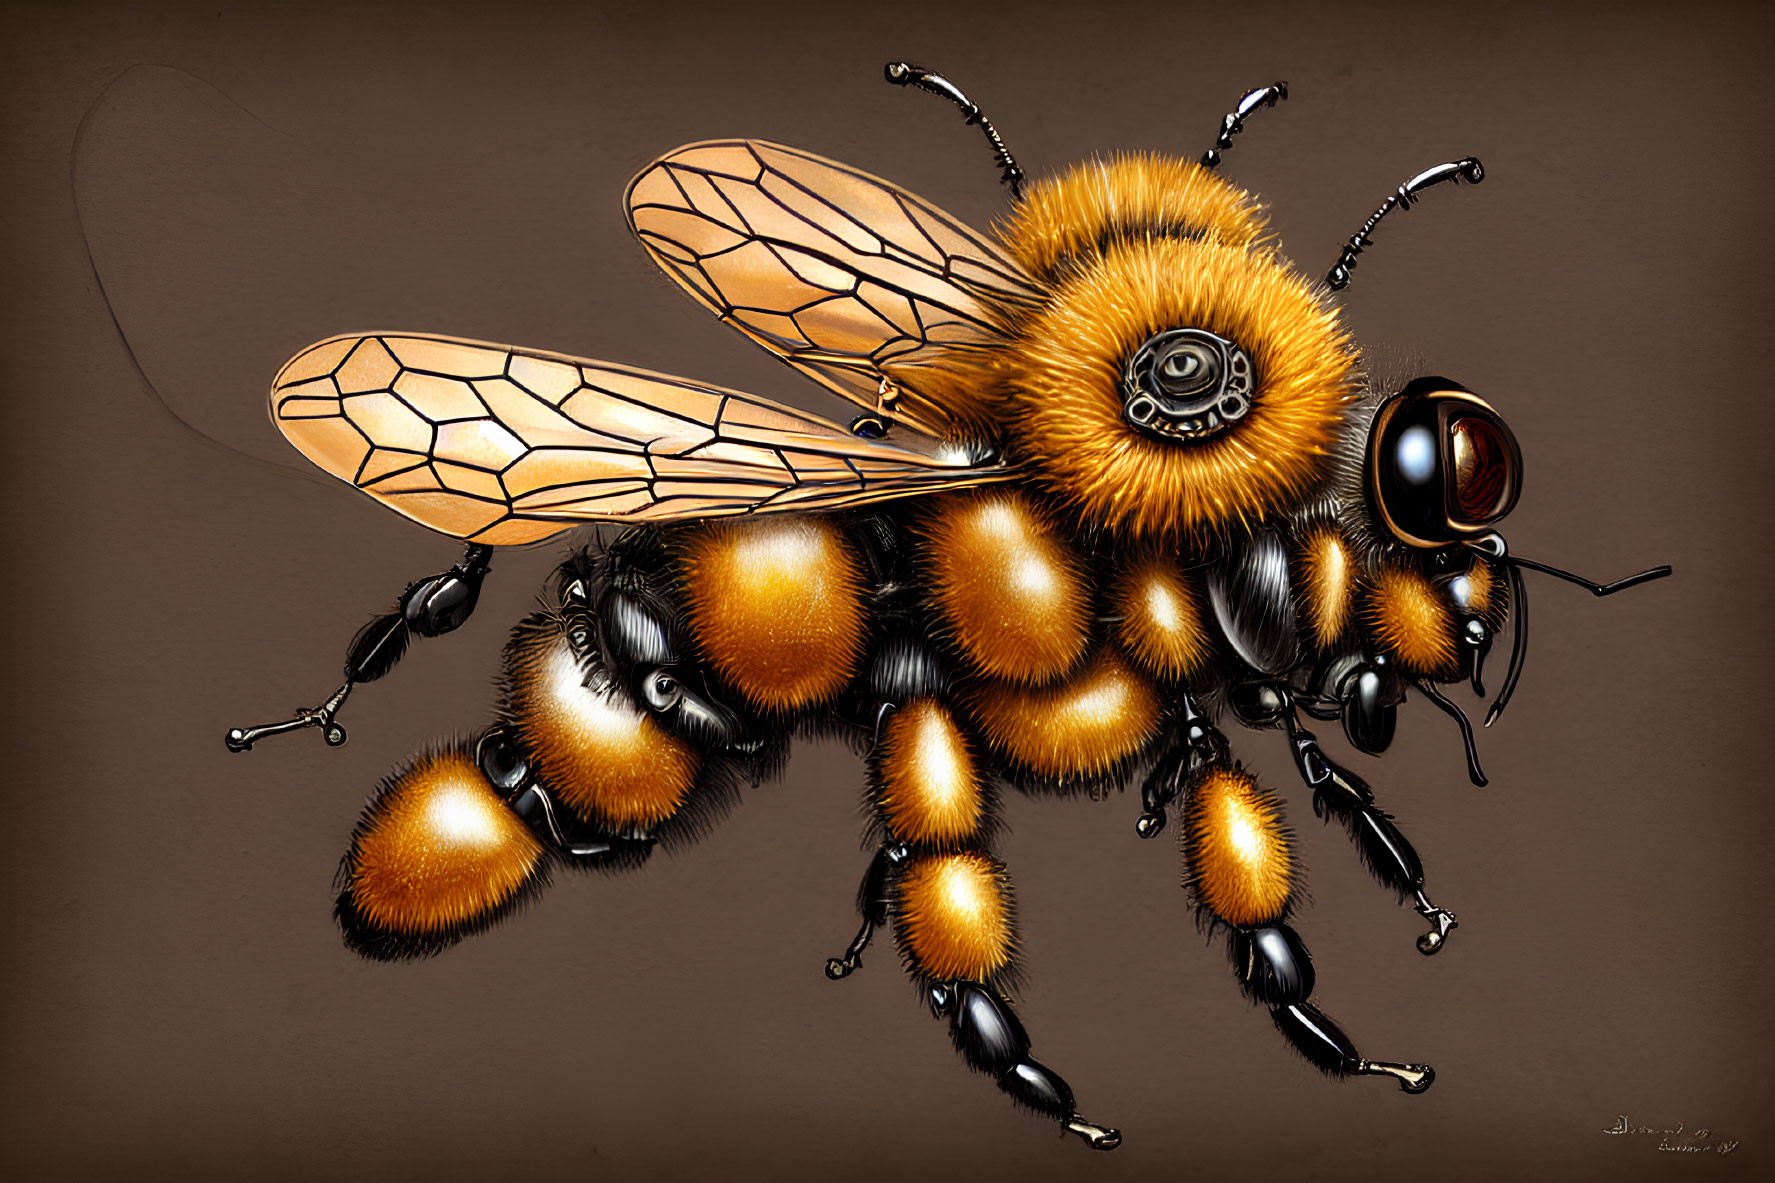 Detailed Stylized Bee Illustration with Transparent Wings on Brown Background